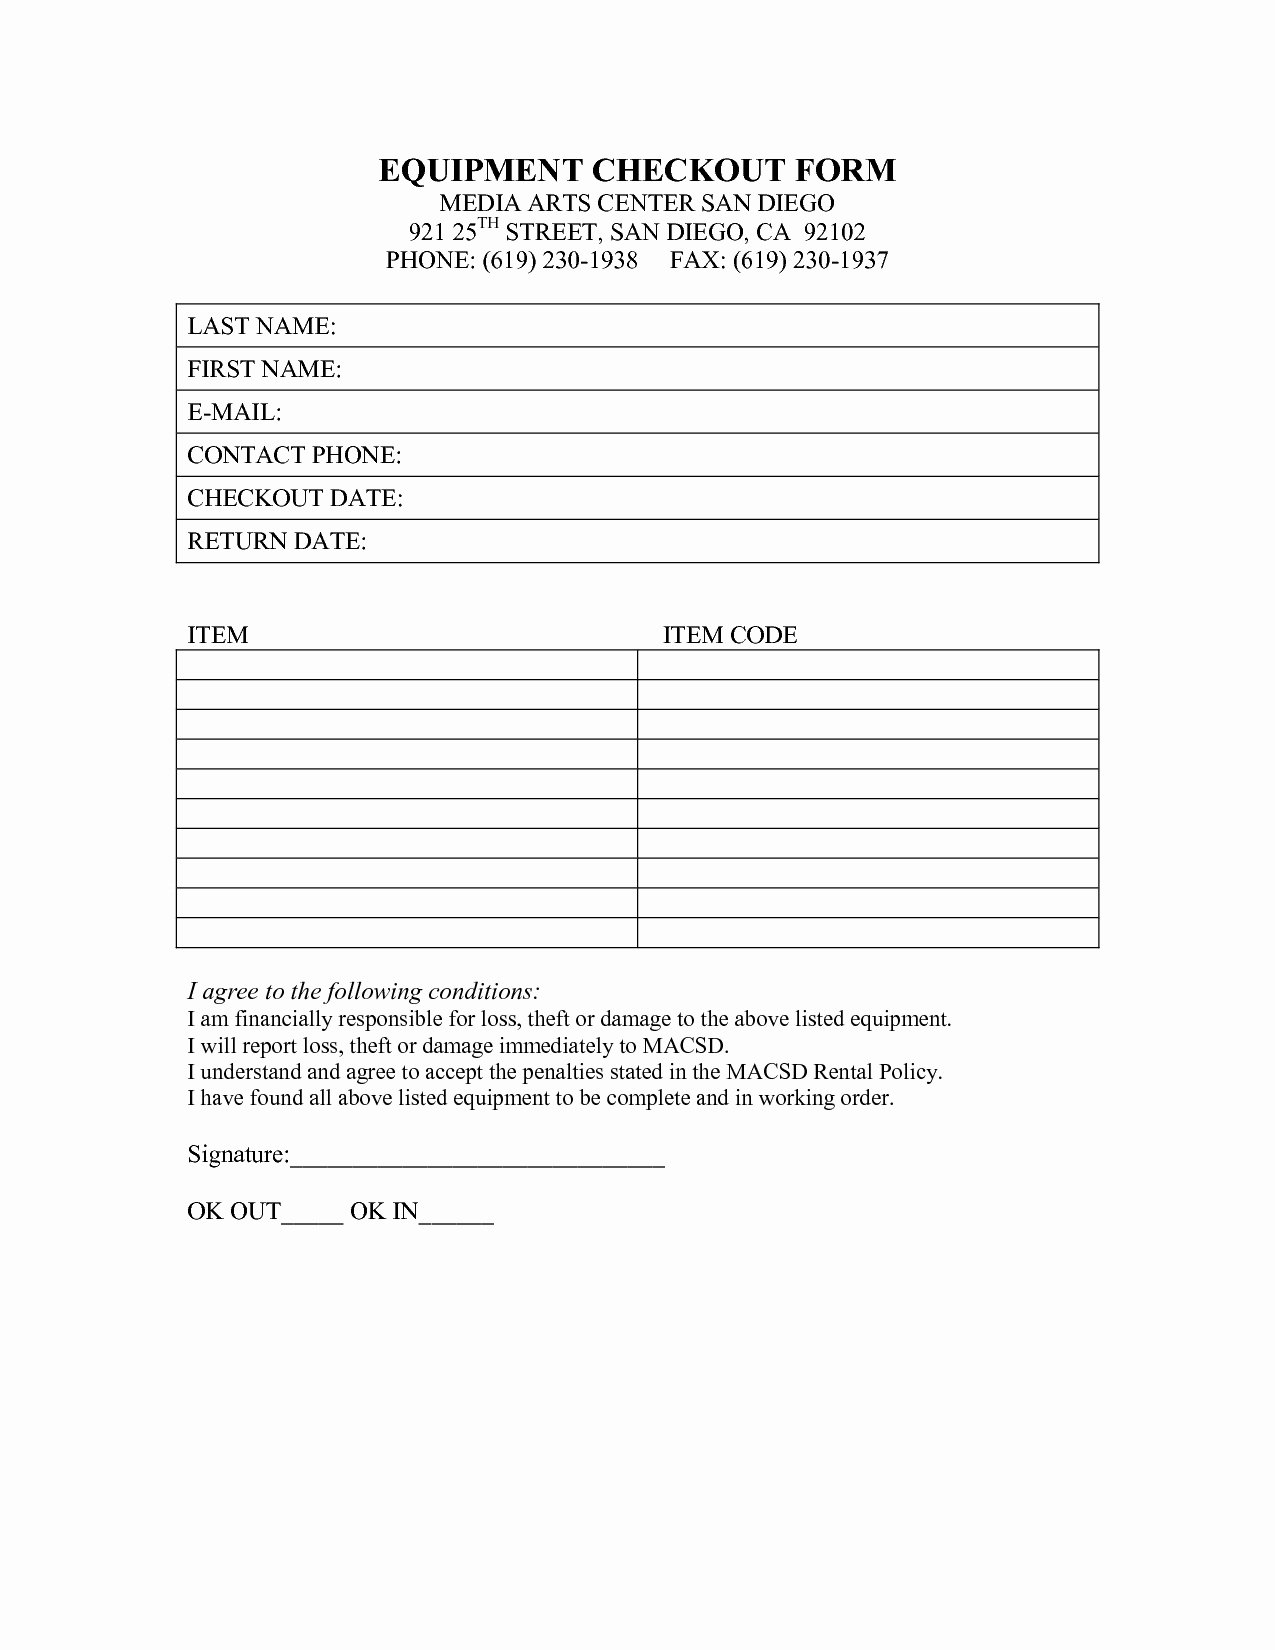 Equipment Checkout form Template Fresh Image Result for Pany Equipment Checkout form